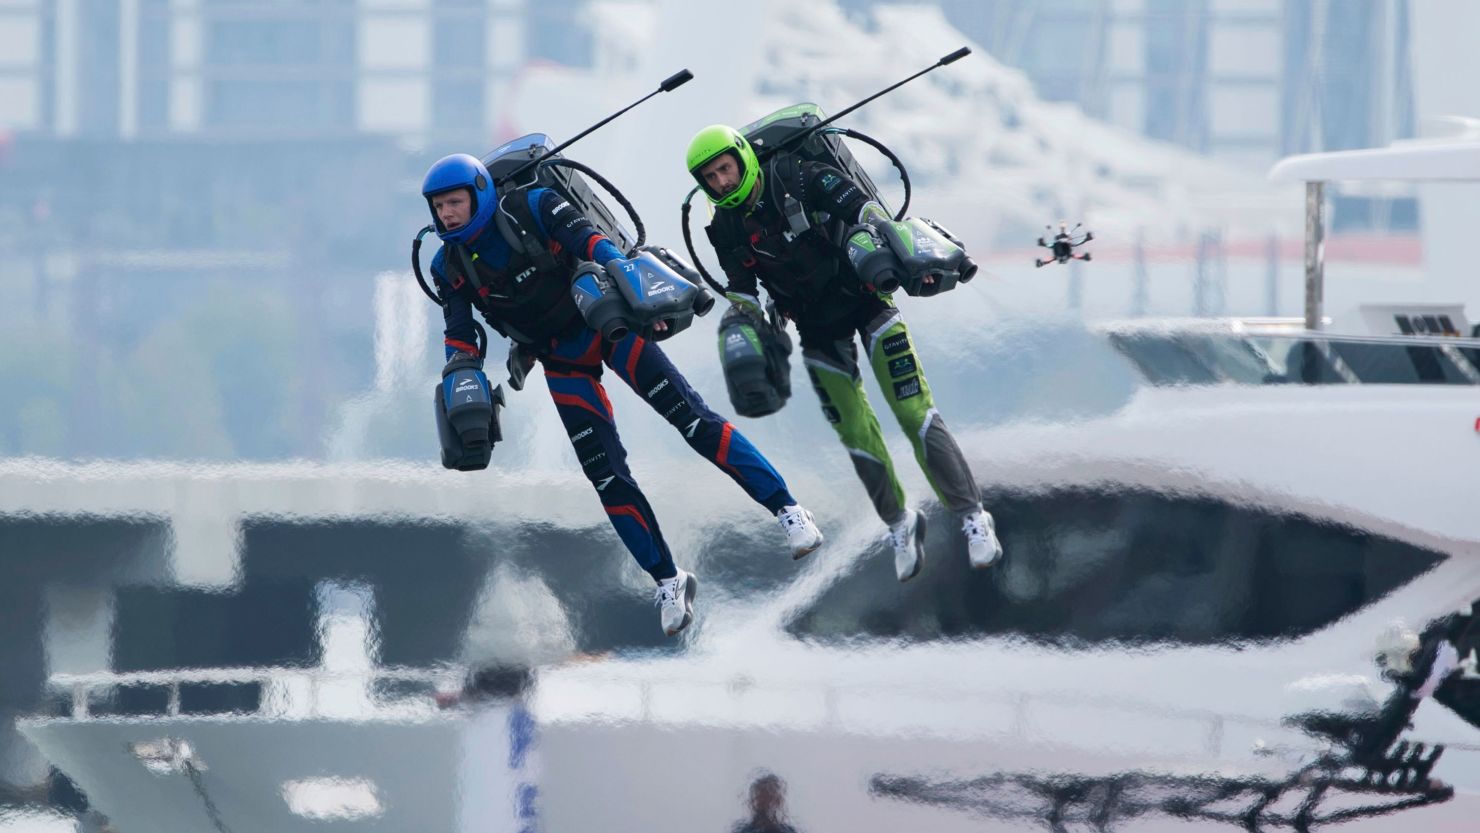 In what's being billed as the world's first-ever jet suit race, two of the competing eight pilots fly against a backdrop of skyscrapers and luxury yachts in Dubai on February 28.